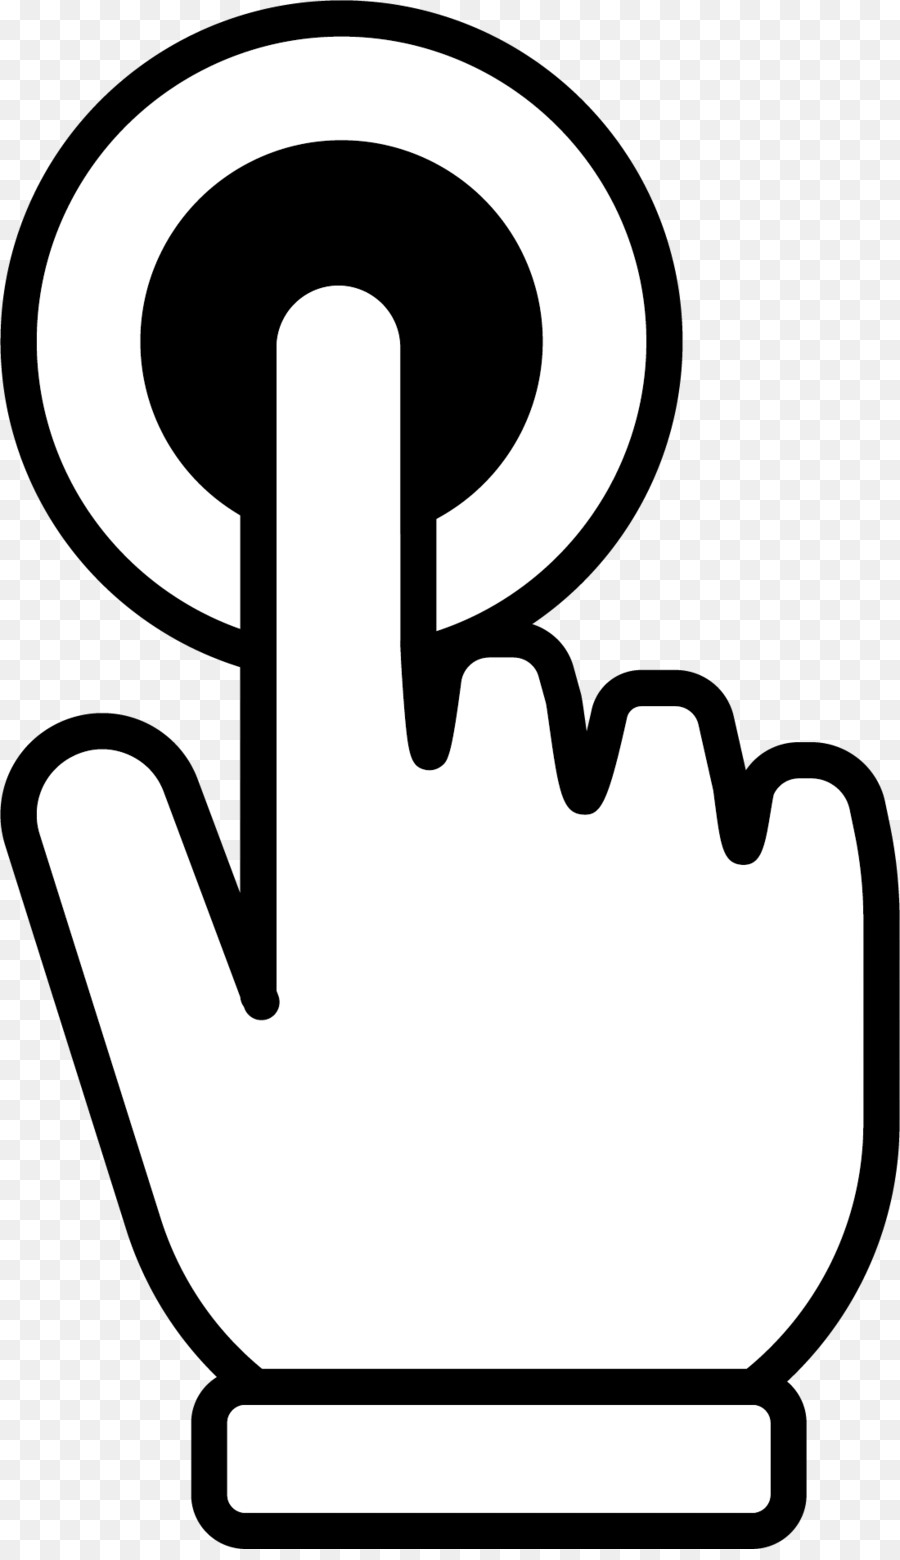 Computer mouse Cursor Icon - Click the hand symbol png download - 1100*1893 - Free Transparent Computer Mouse png Download.